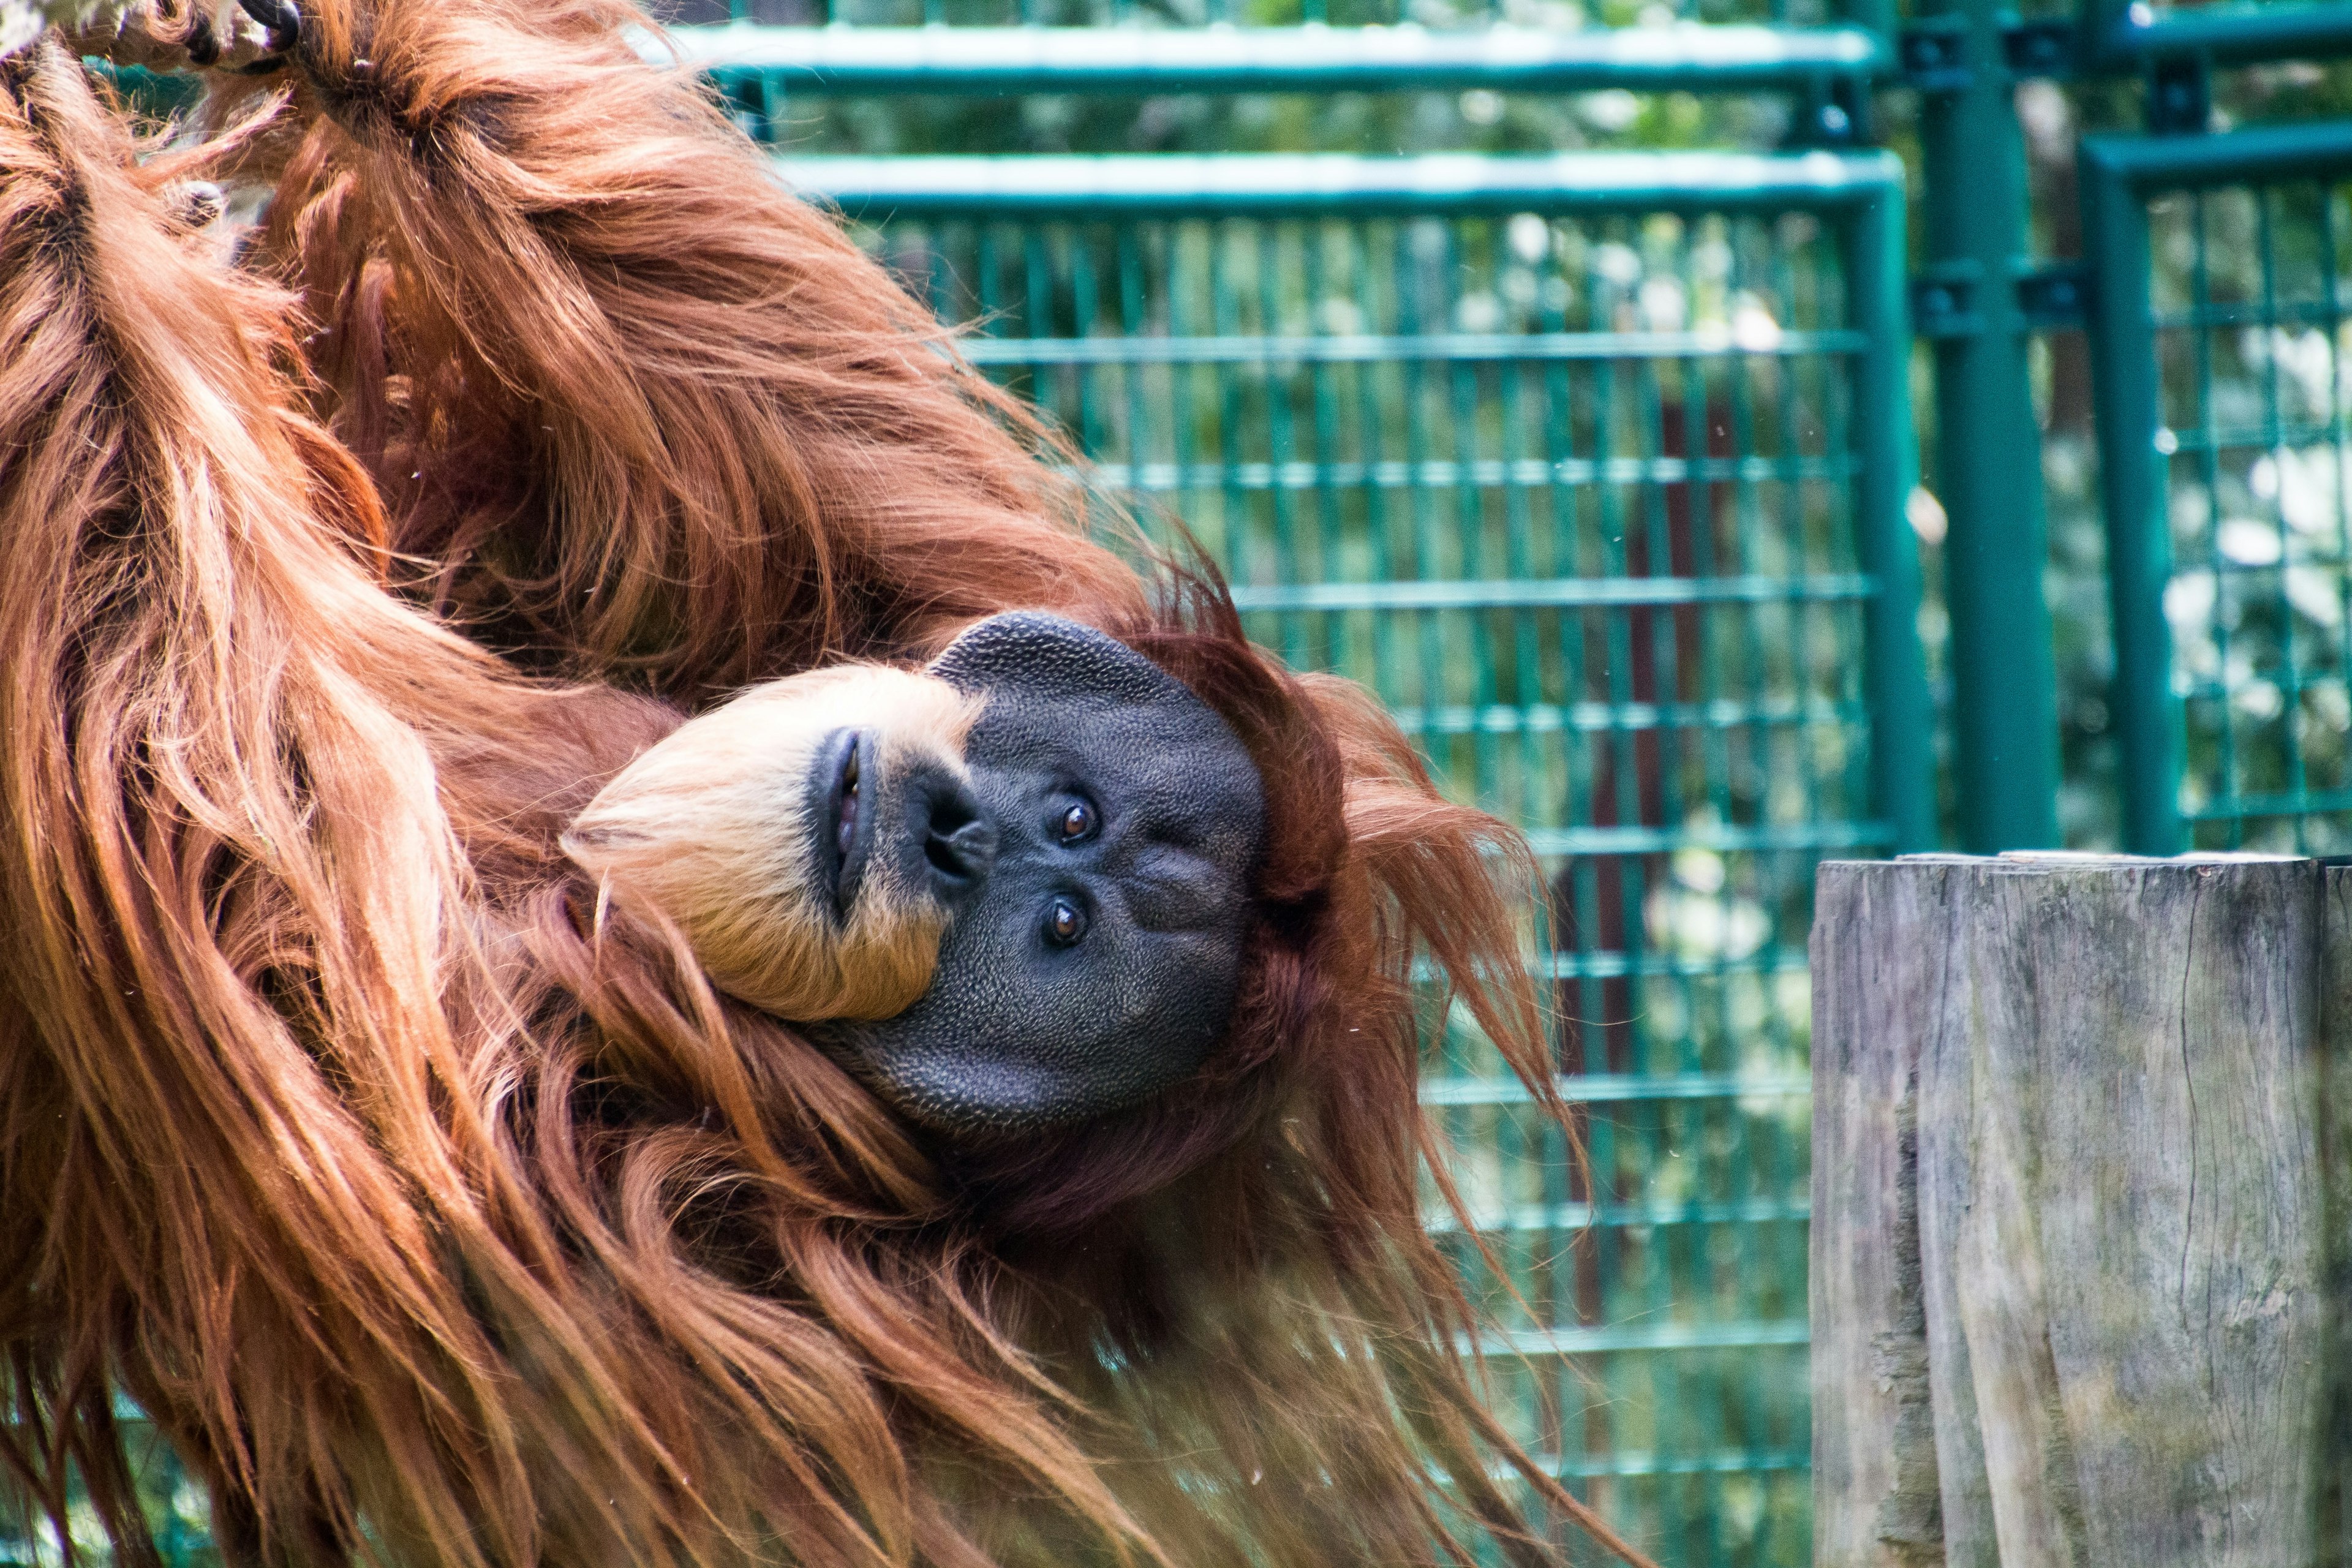 an orangutan hanging out in a green cage in a zoo